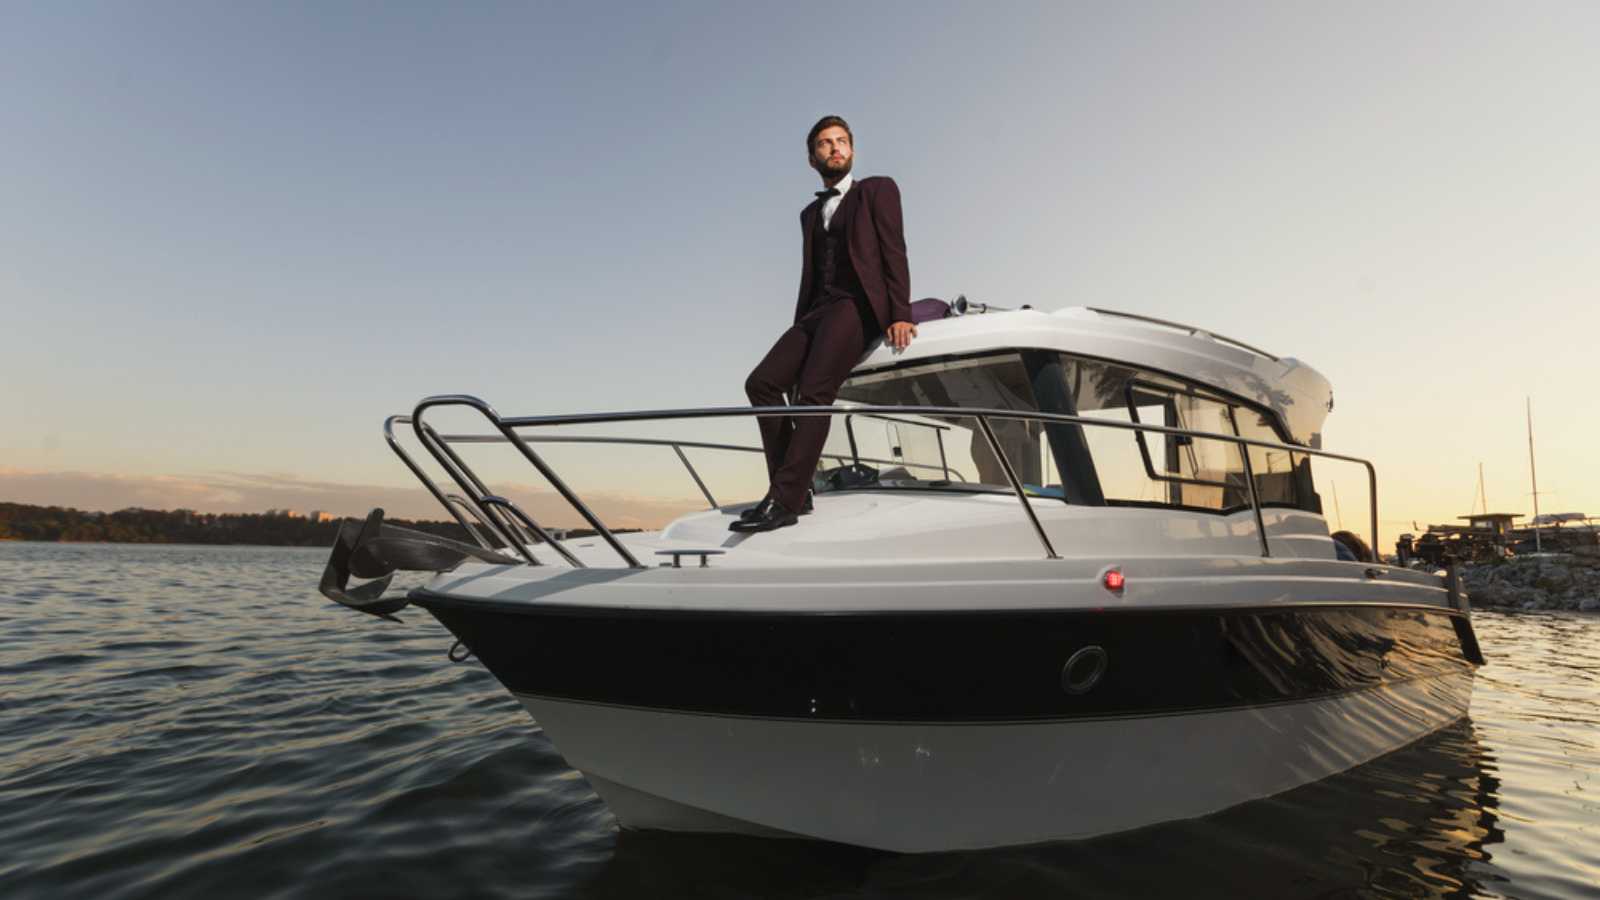 Business Man owning a Yacht